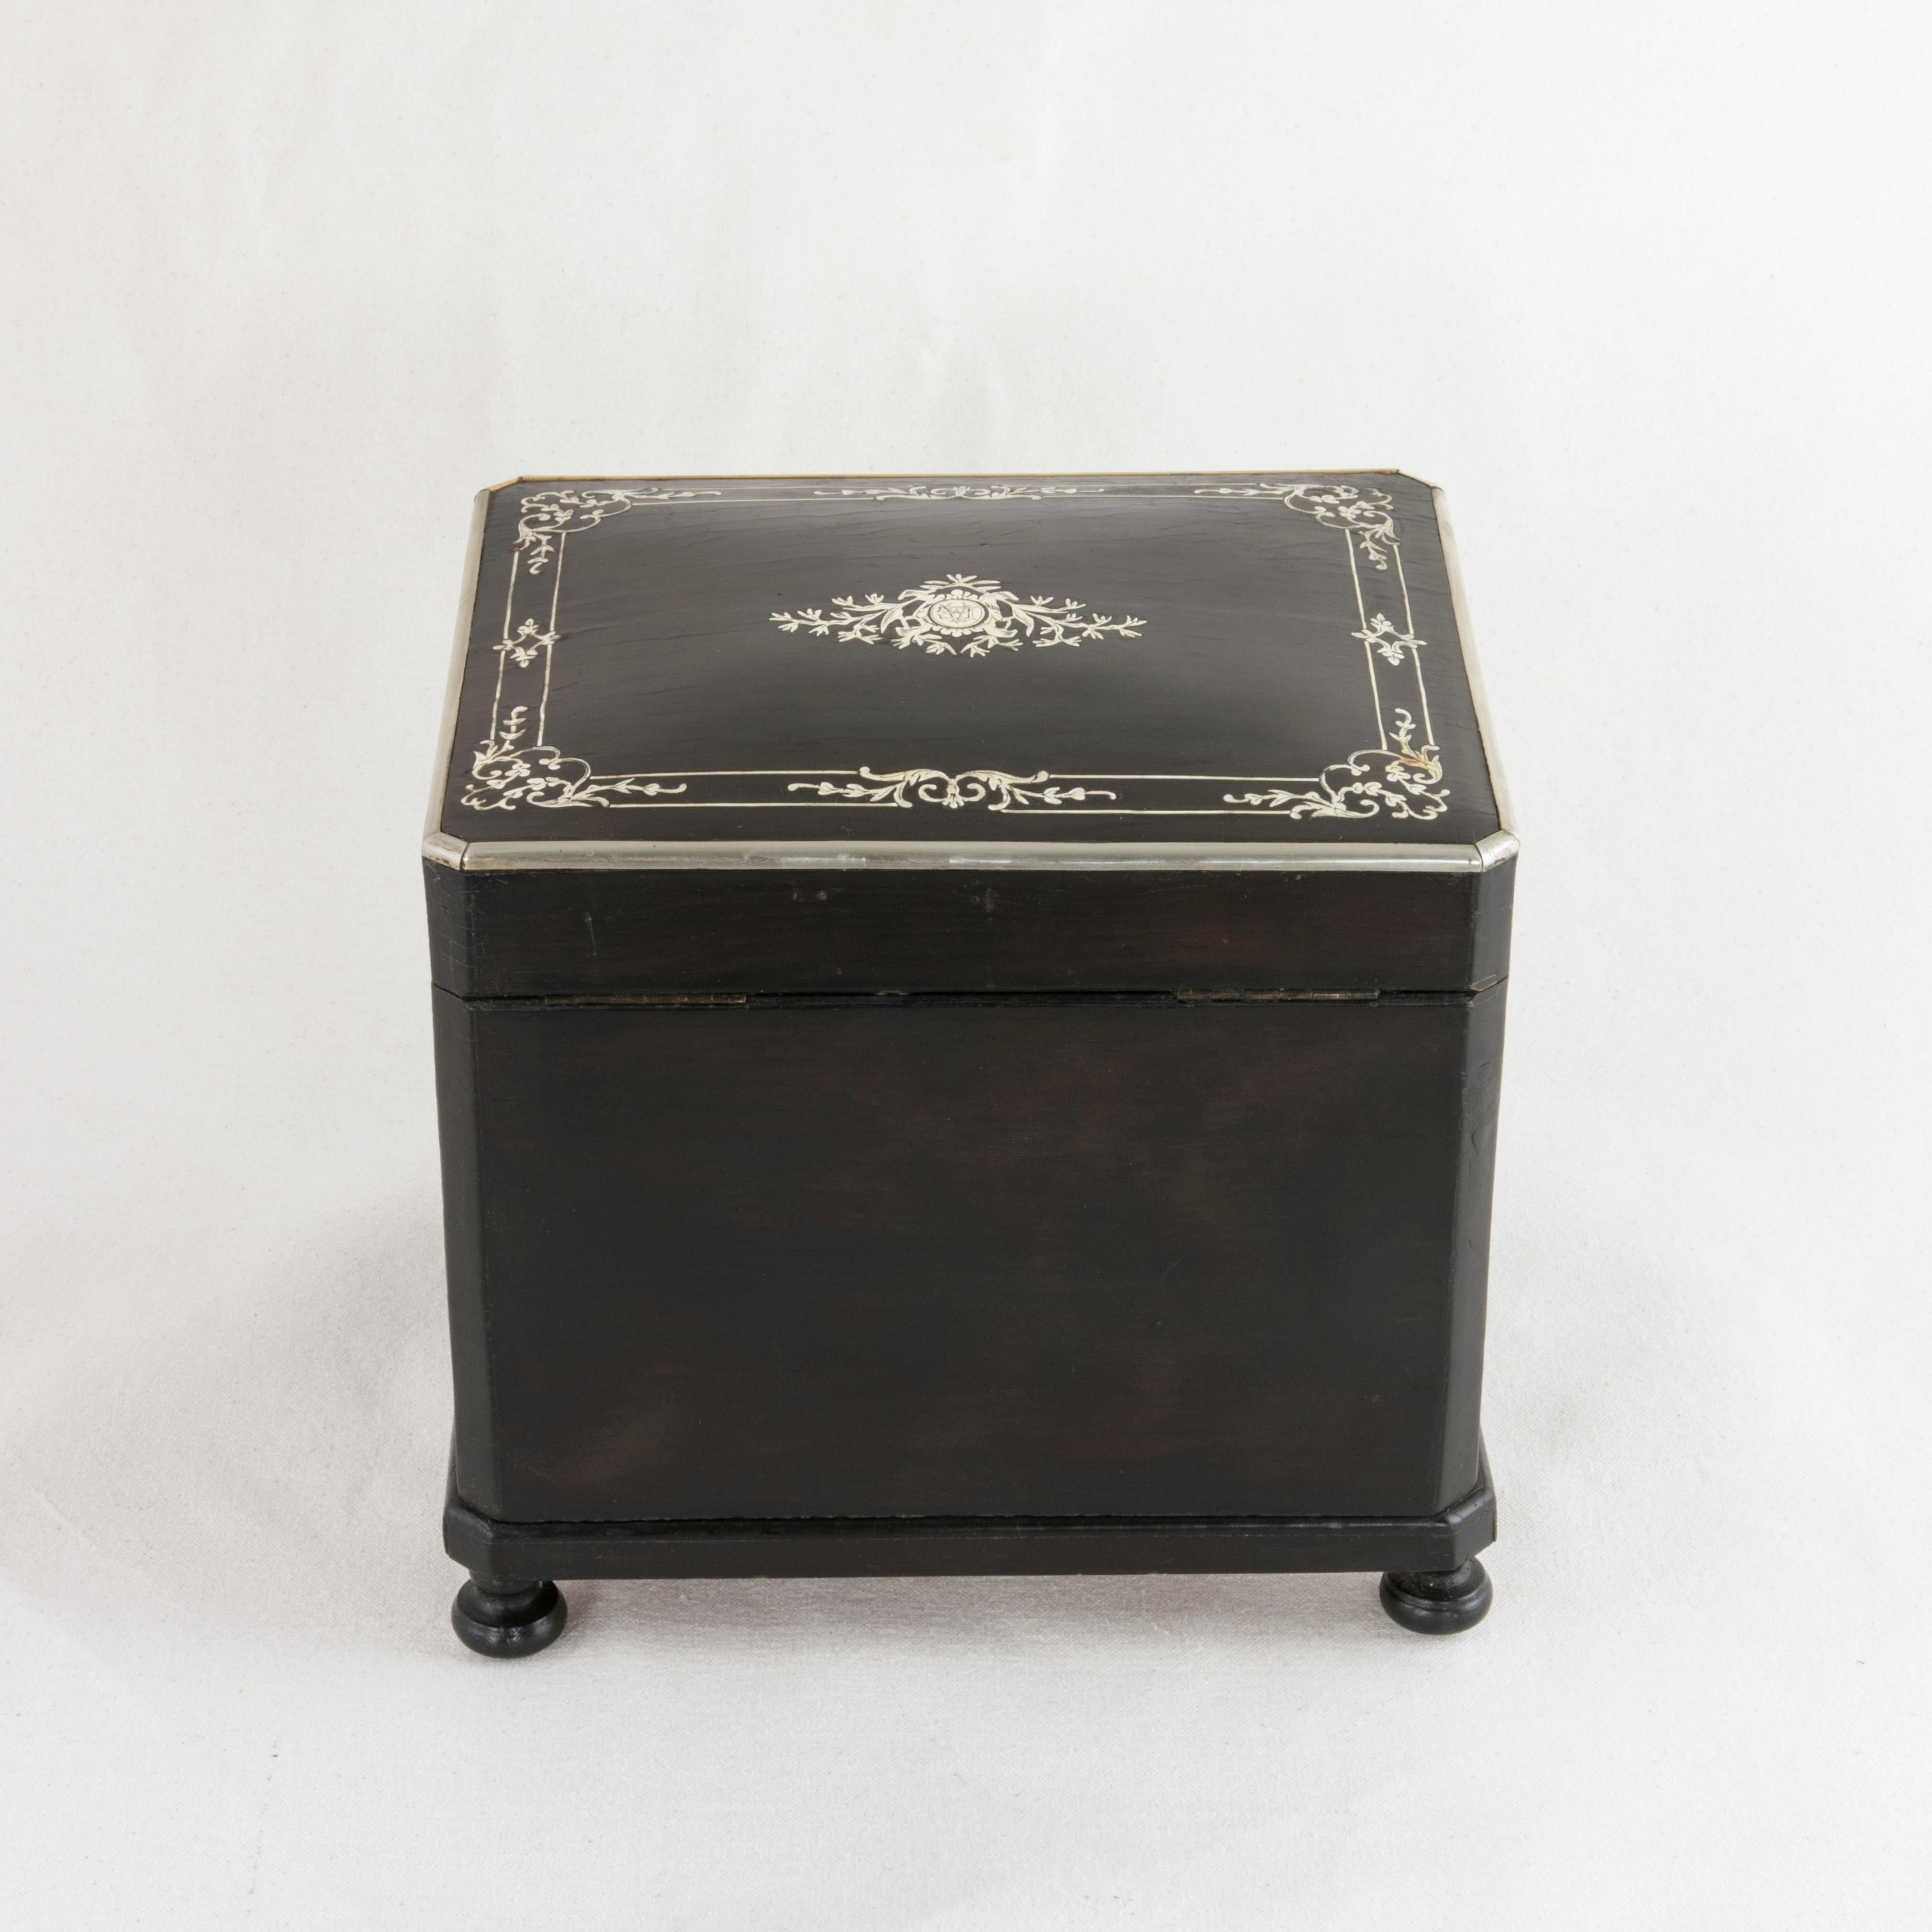 Mid-19th Century 19th Century French Napoleon III Period Black Lacquer Cigar Box with Bone Inlay